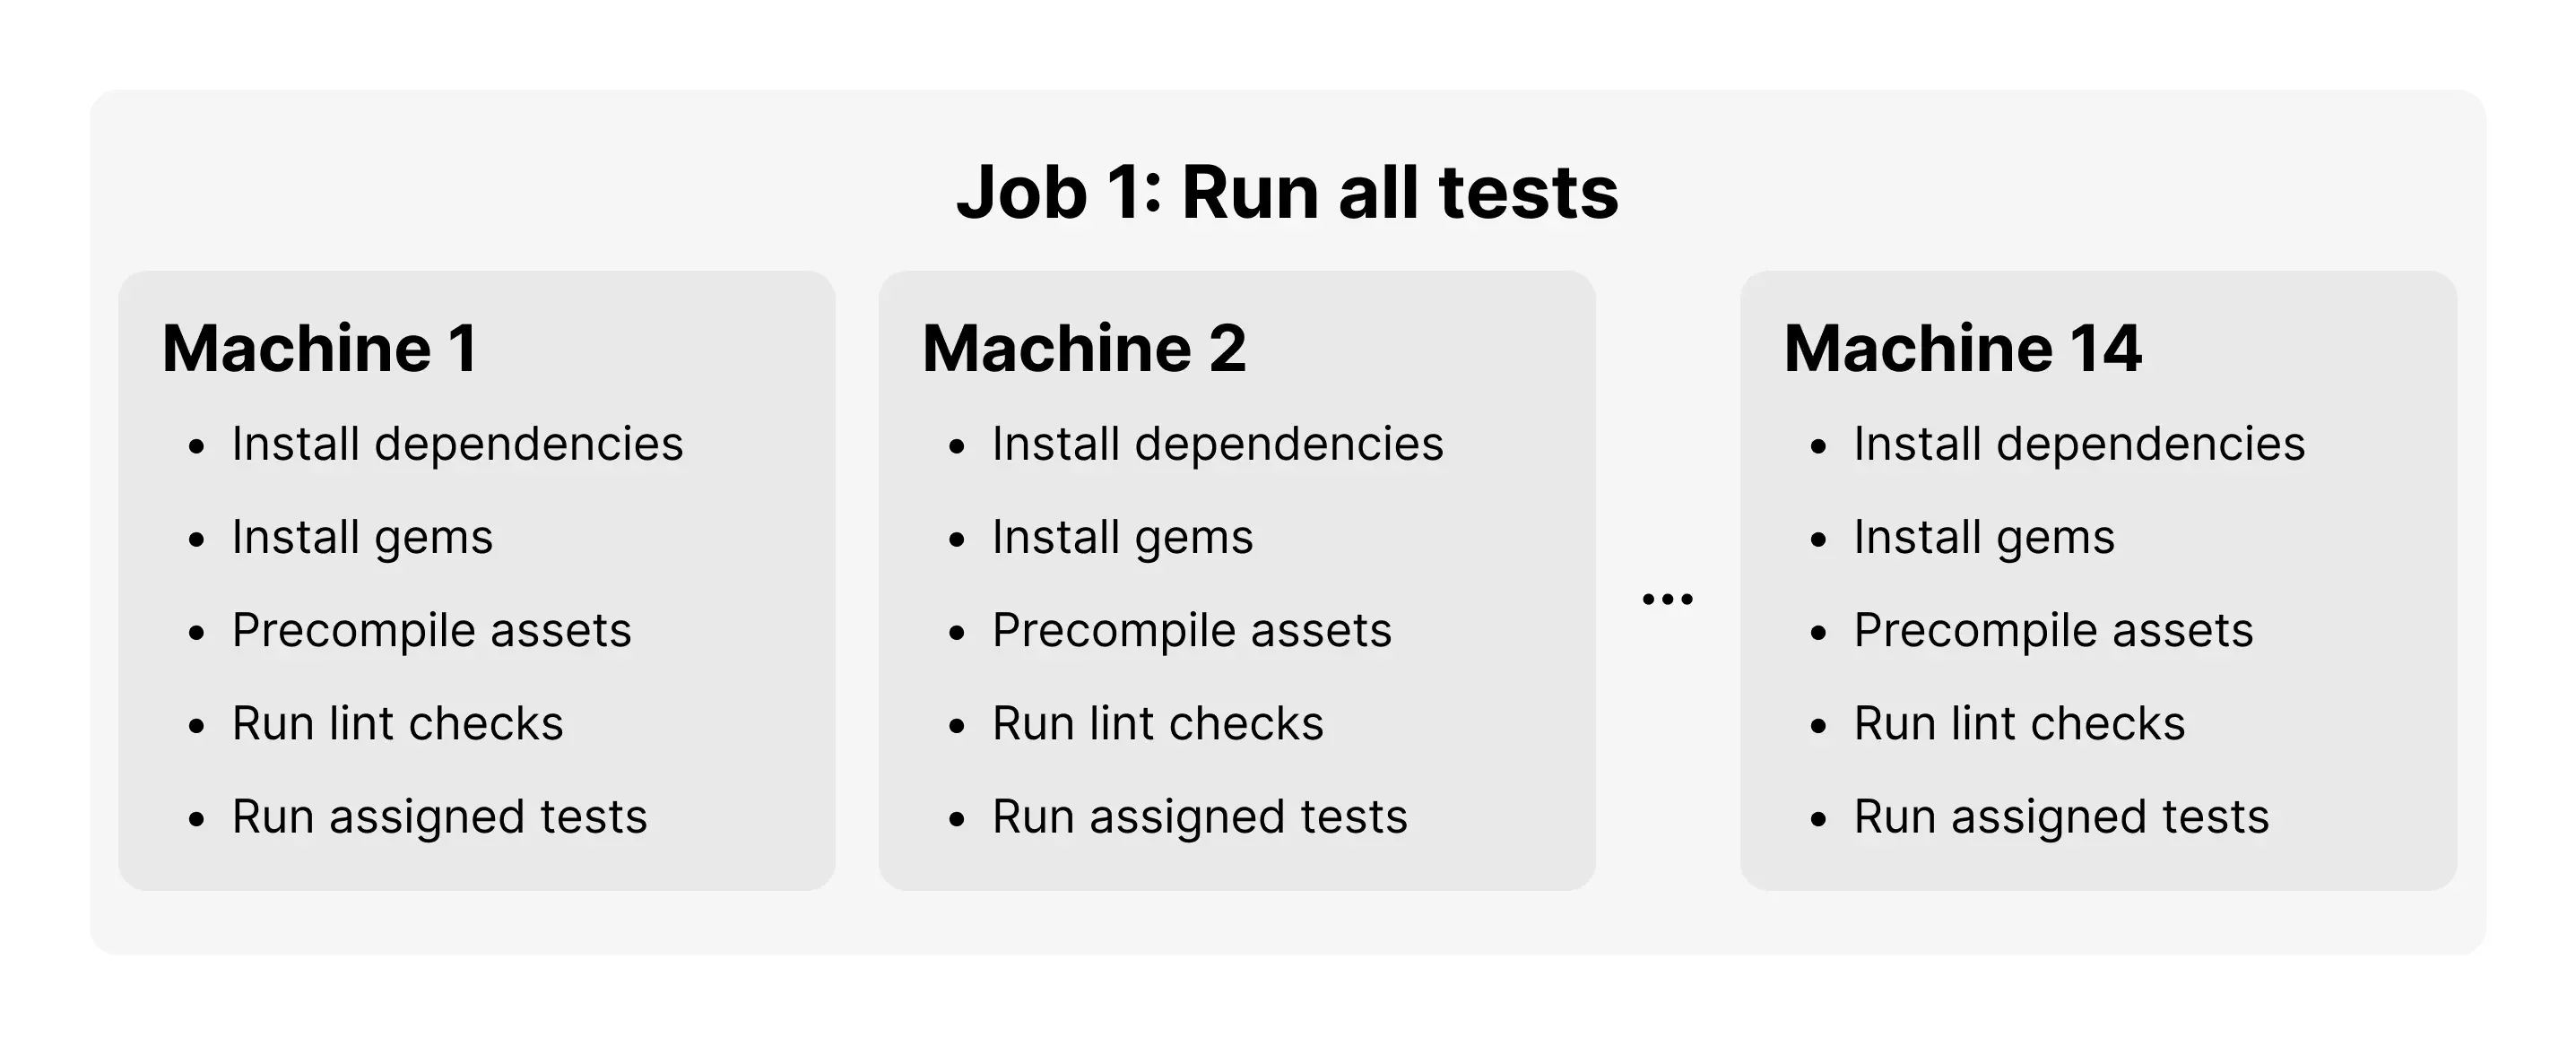 Before - A single job for running all tests